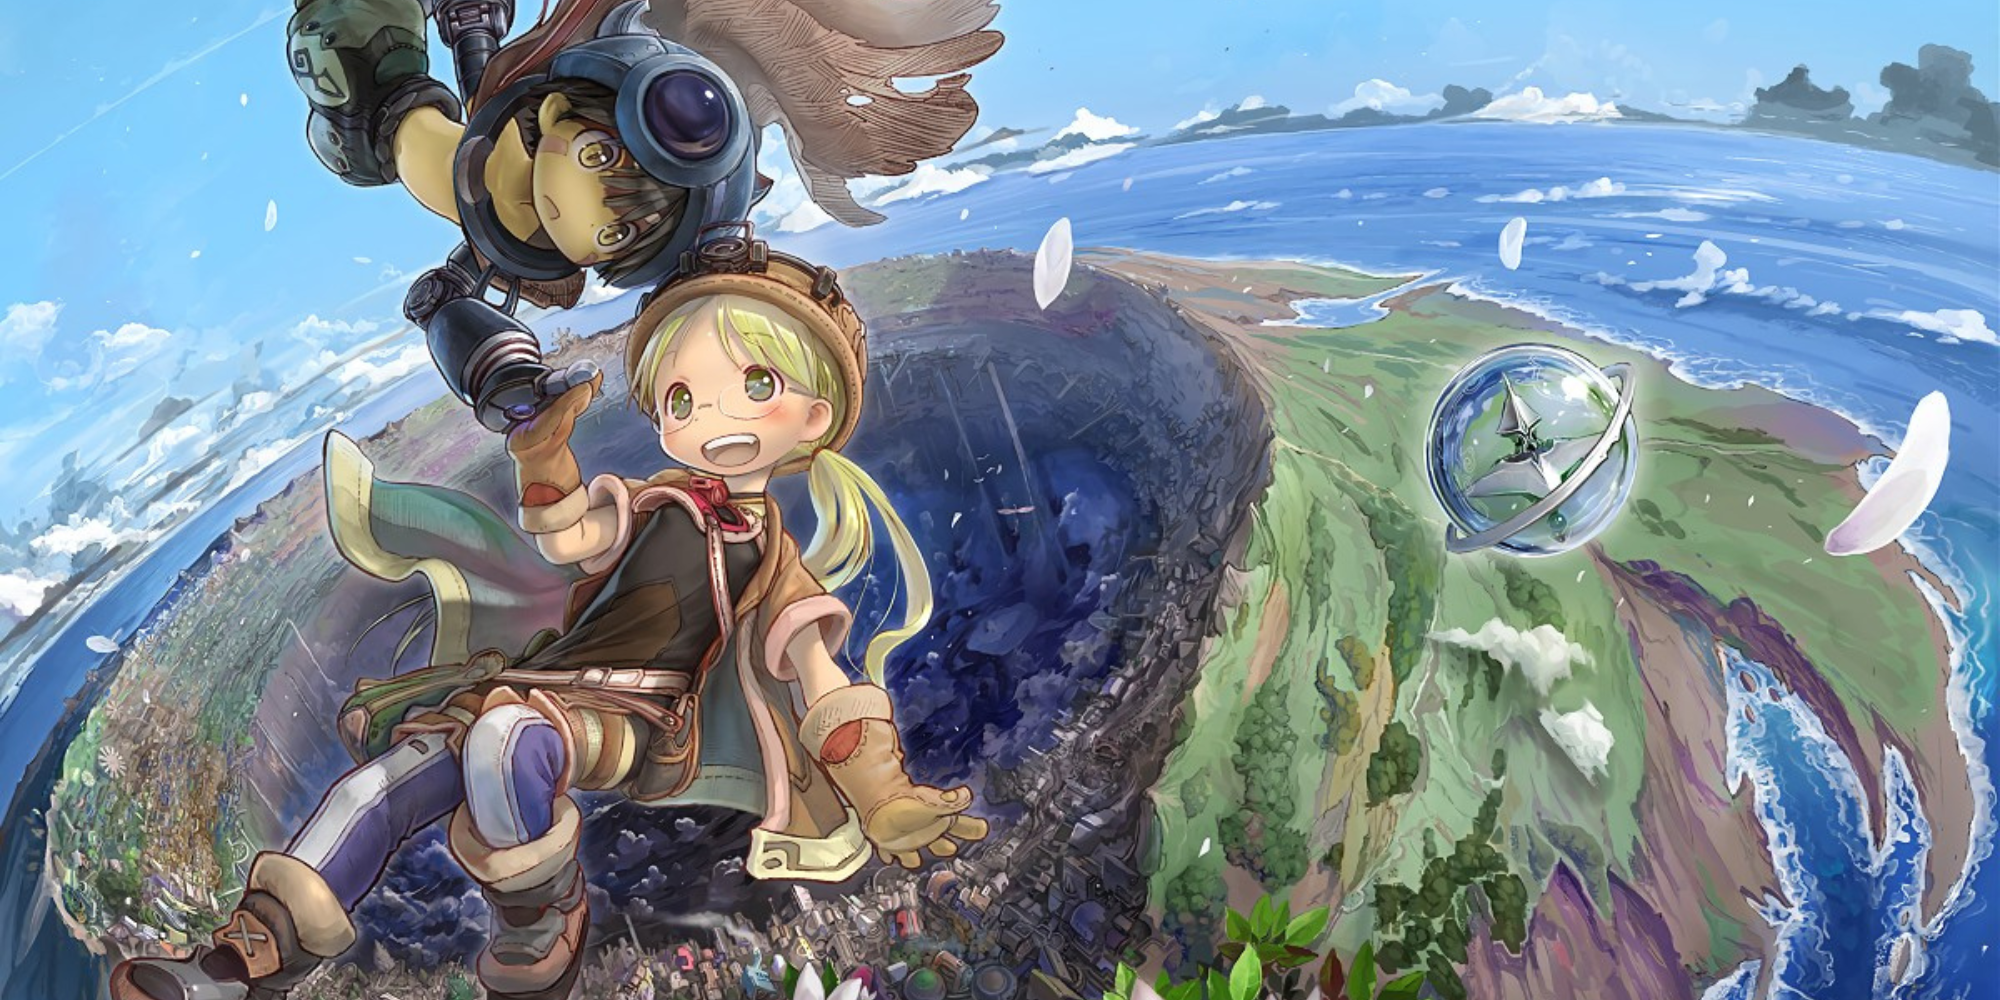 MADE IN ABYSS is coming to the catalogue Netflix this December 31, 2023. :  r/MadeInAbyss